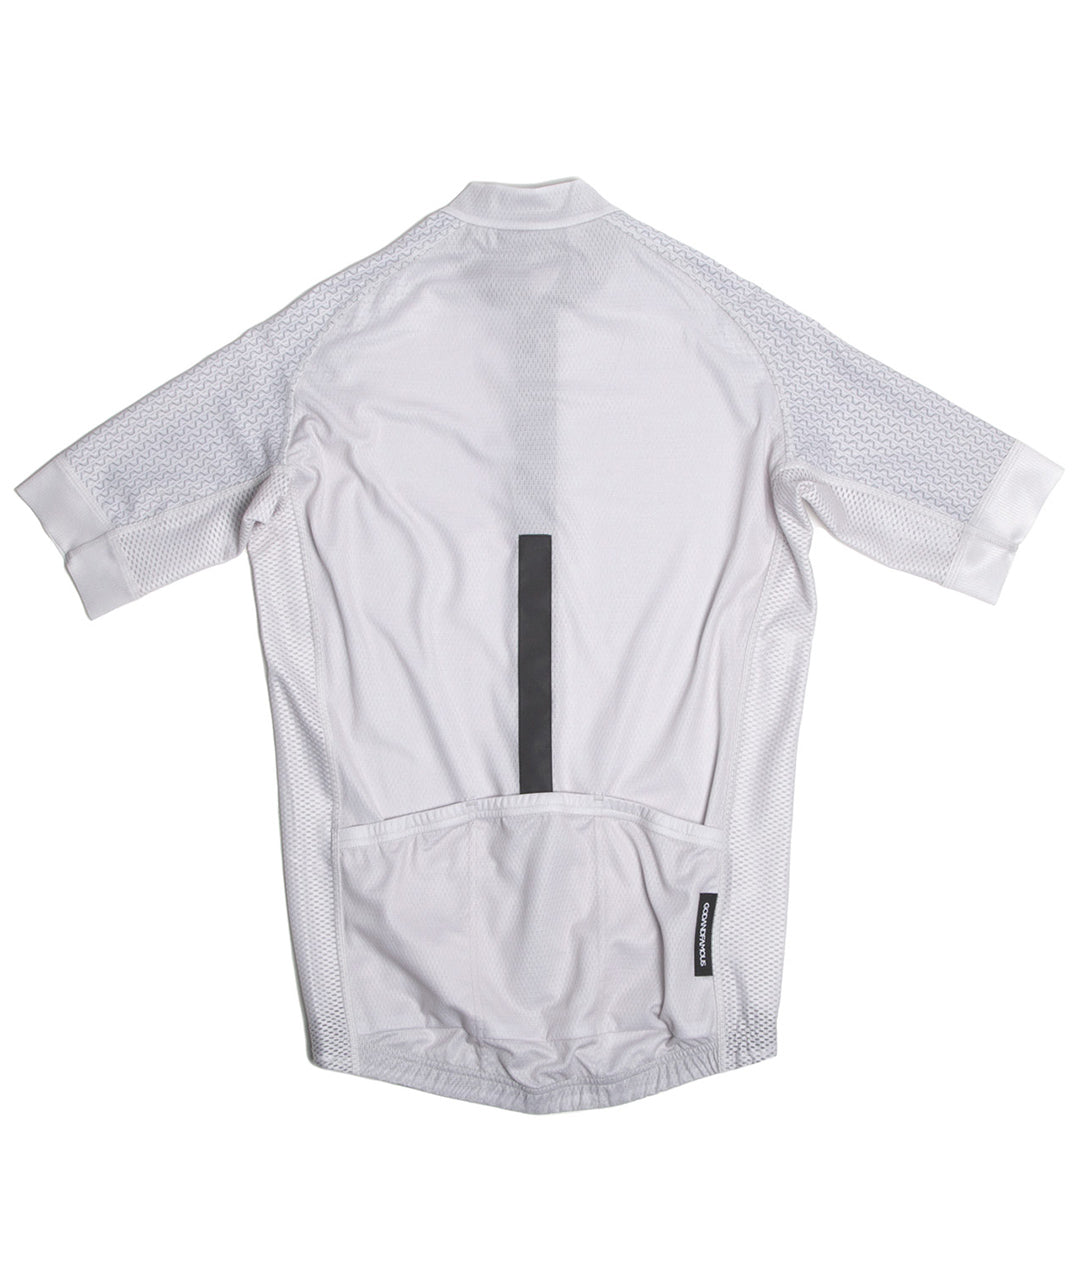 Famus cropped practice jersey white